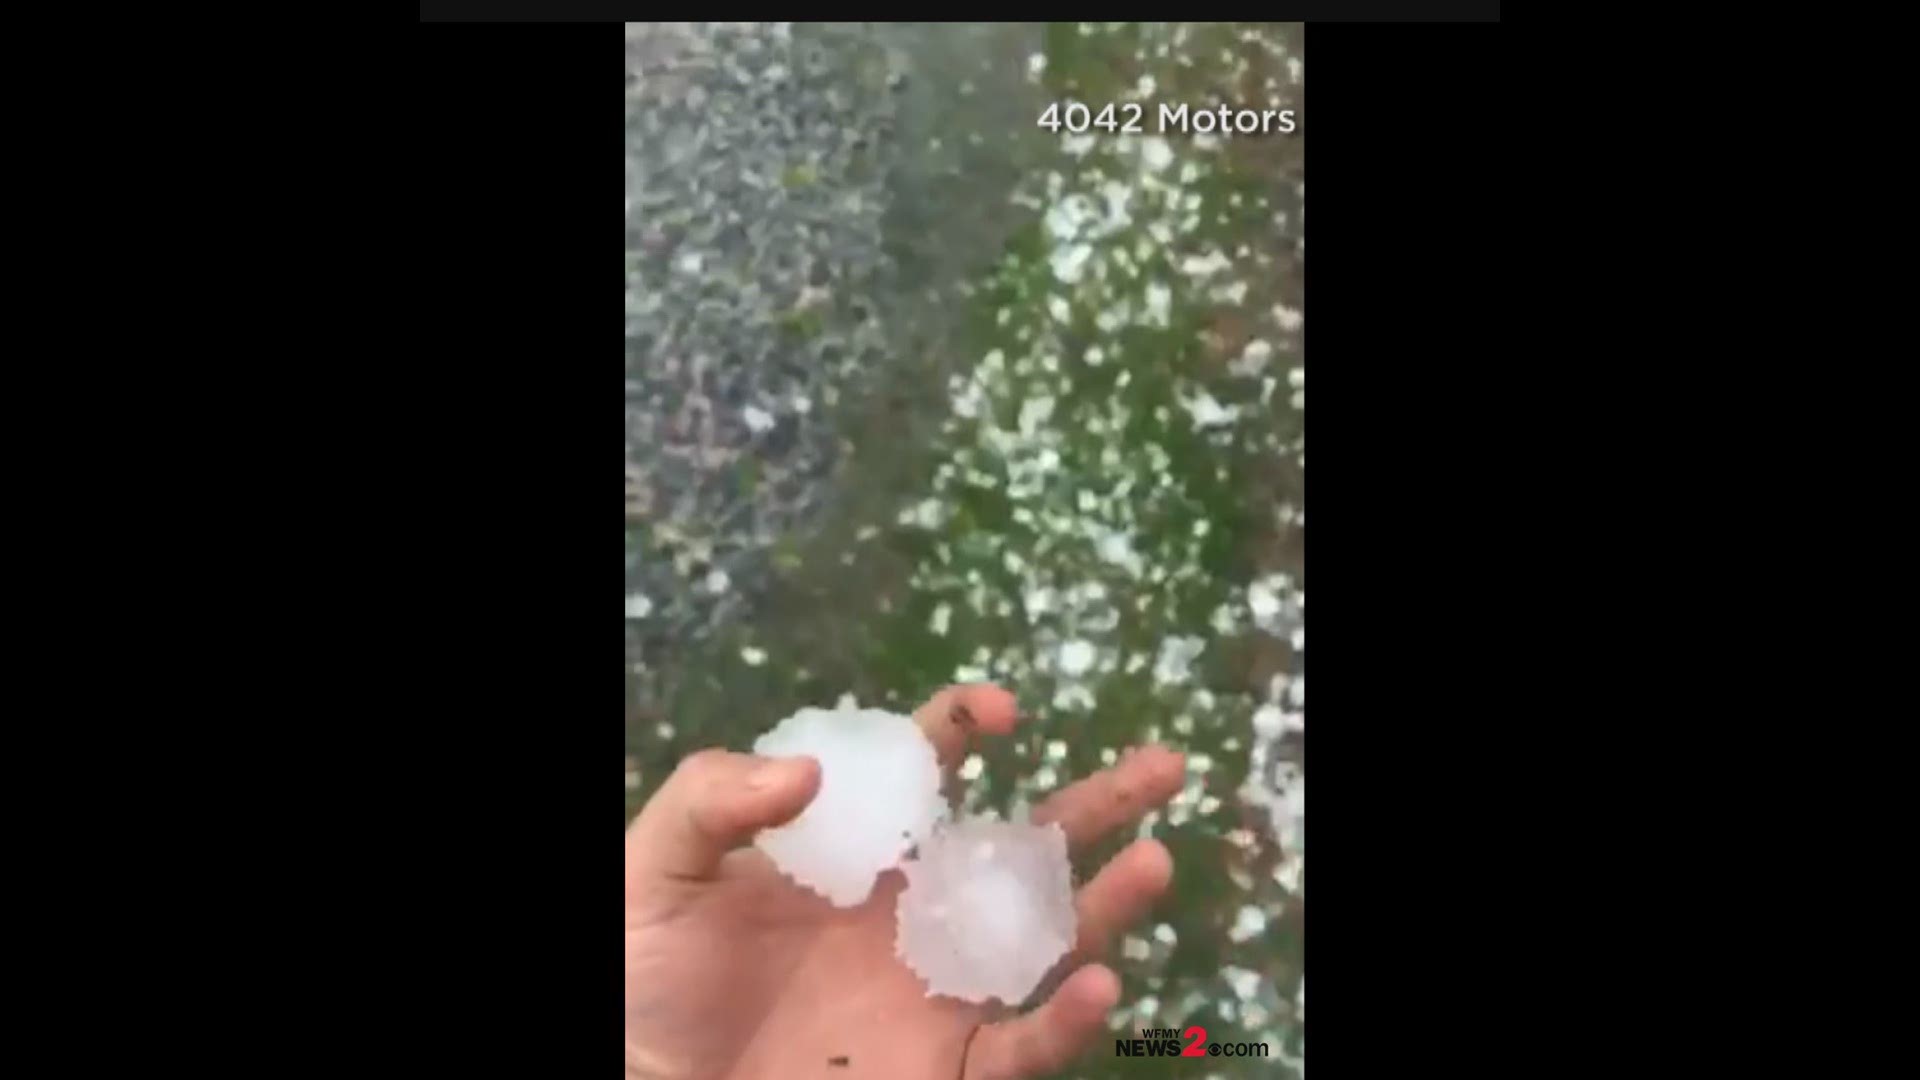 Crazy hail video captured during storm in Garner, NC. The hail was so bad it busted out car windshields.